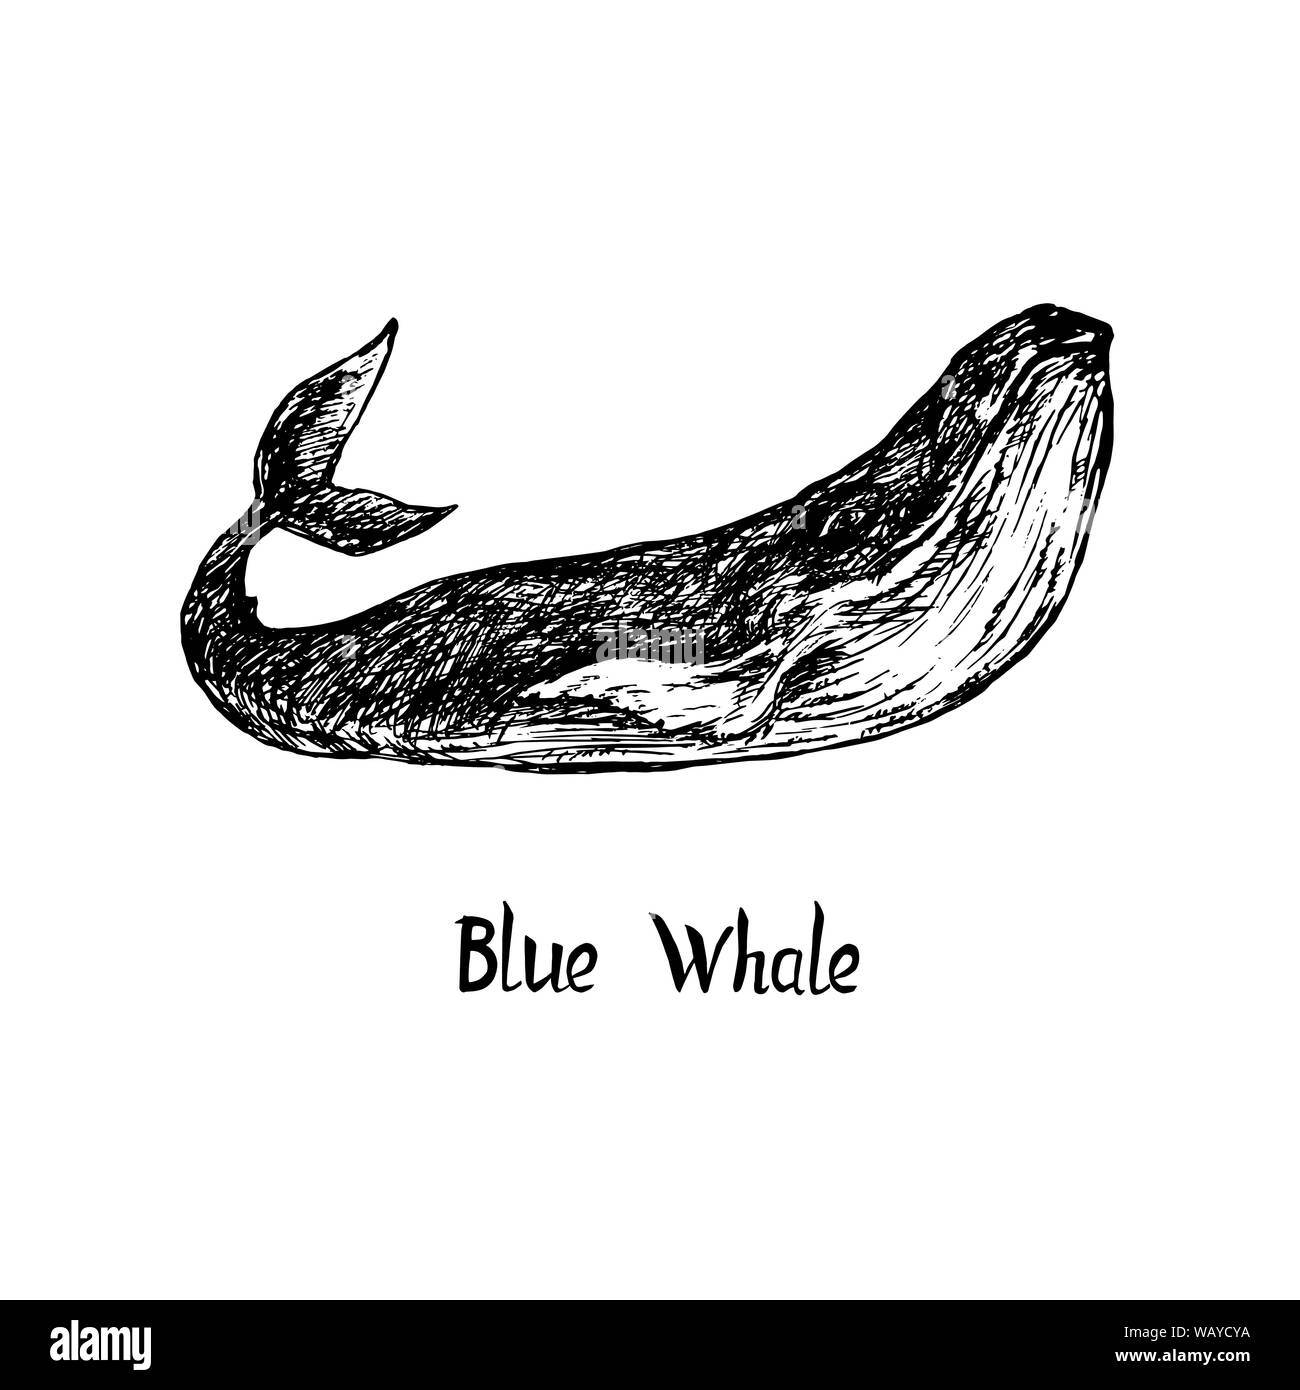 Blue whale drawing, vintage engraved illustration style, hand drawn doodle, sketch with inscription Stock Photo